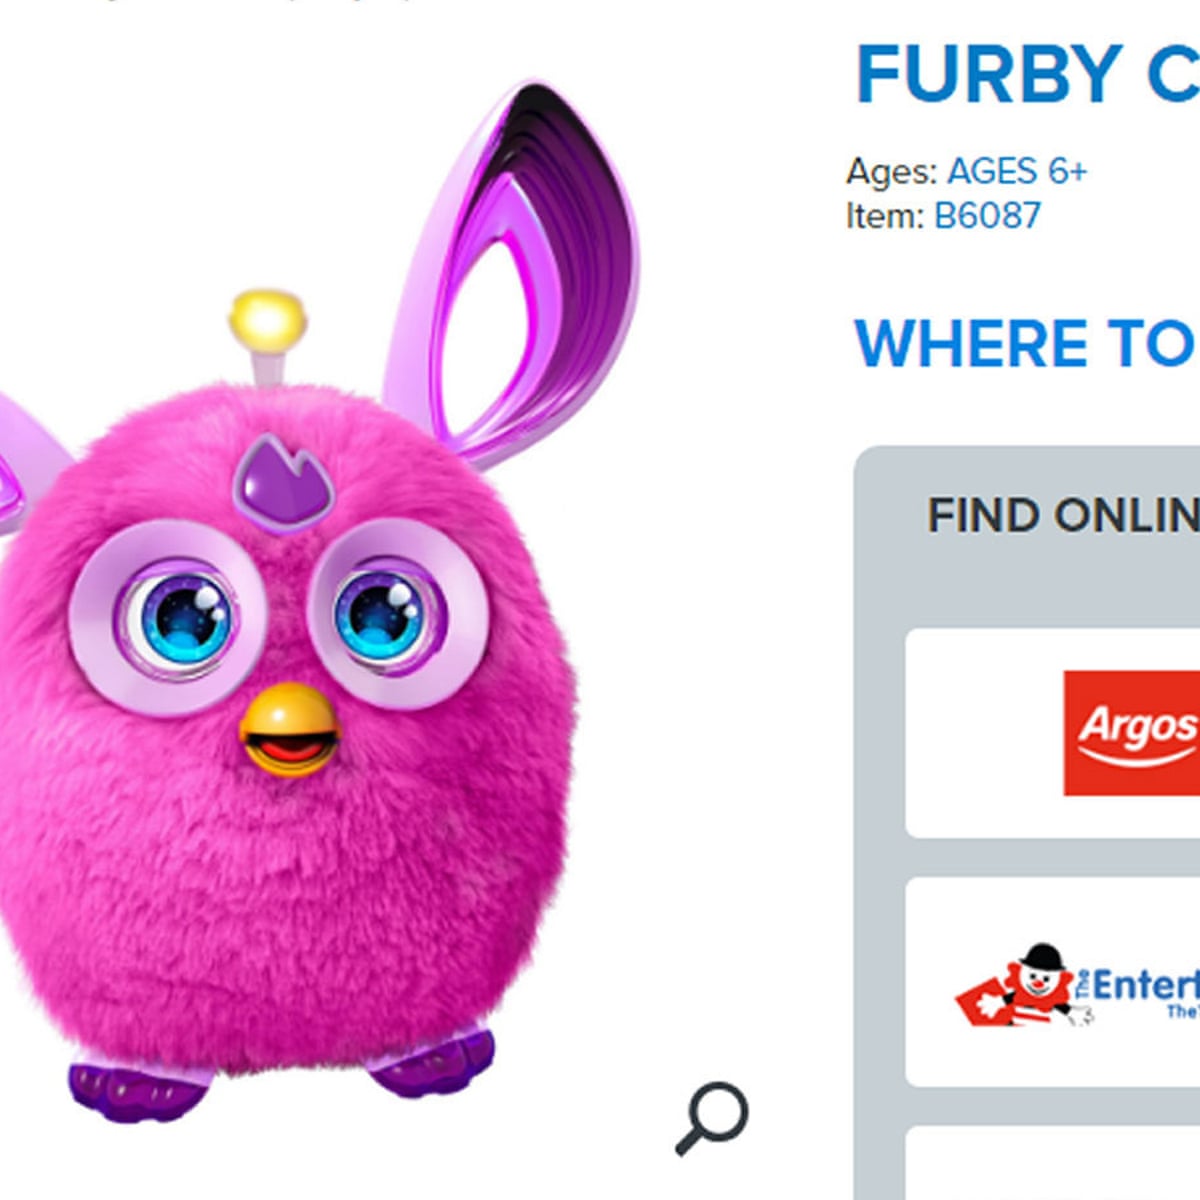 Why won't Argos let me return my Furby after security alert?, Money